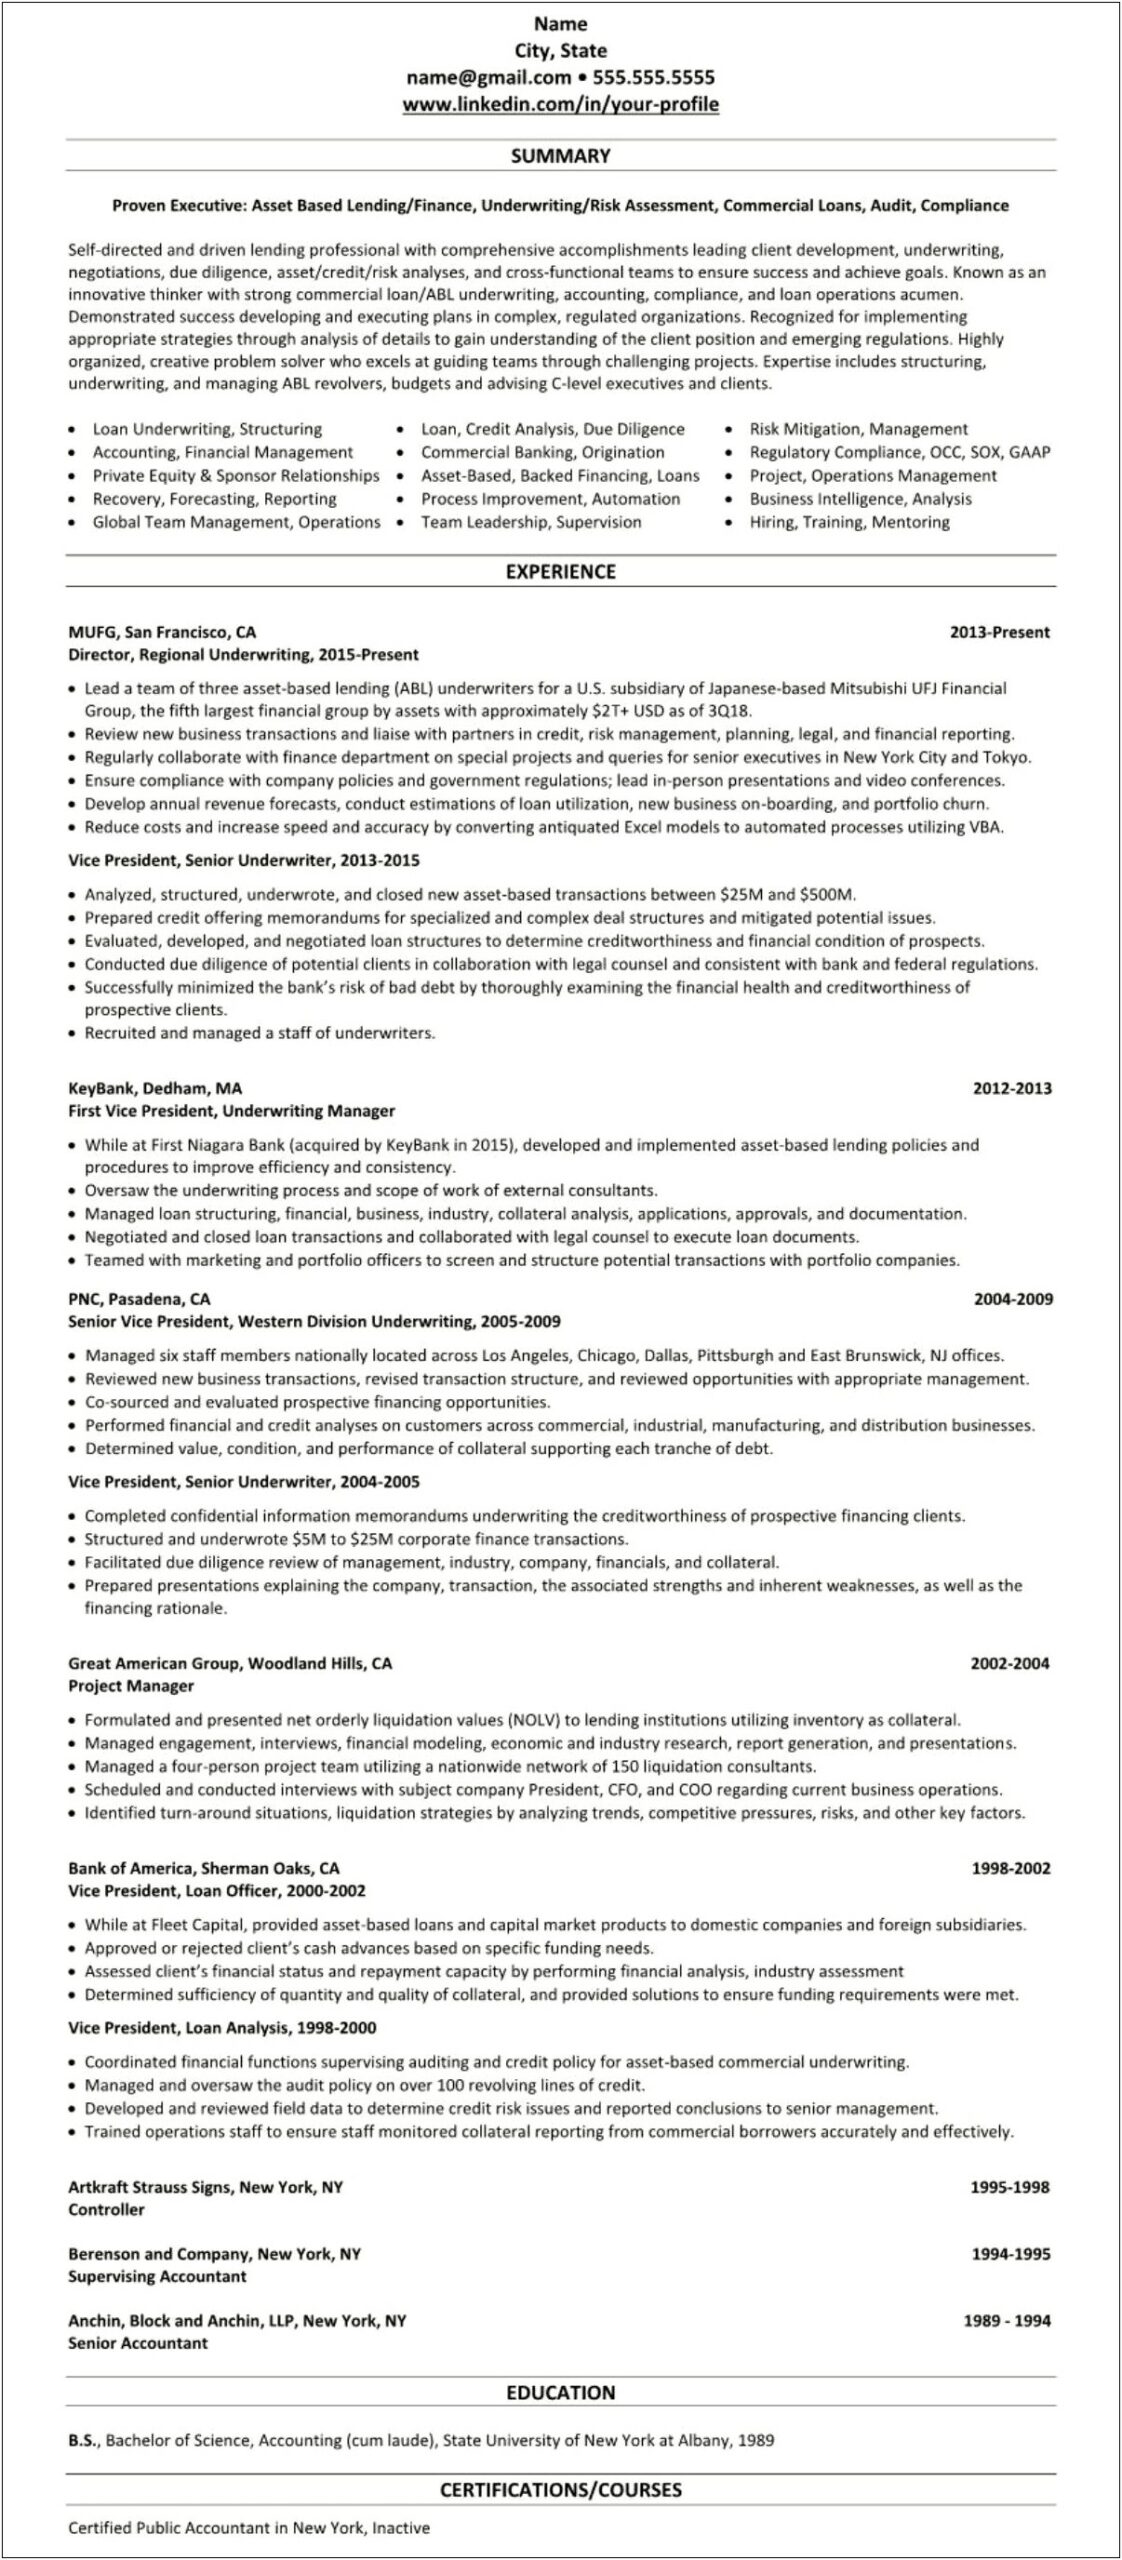 Entry Level Mortgage Underwriter Resume Examples